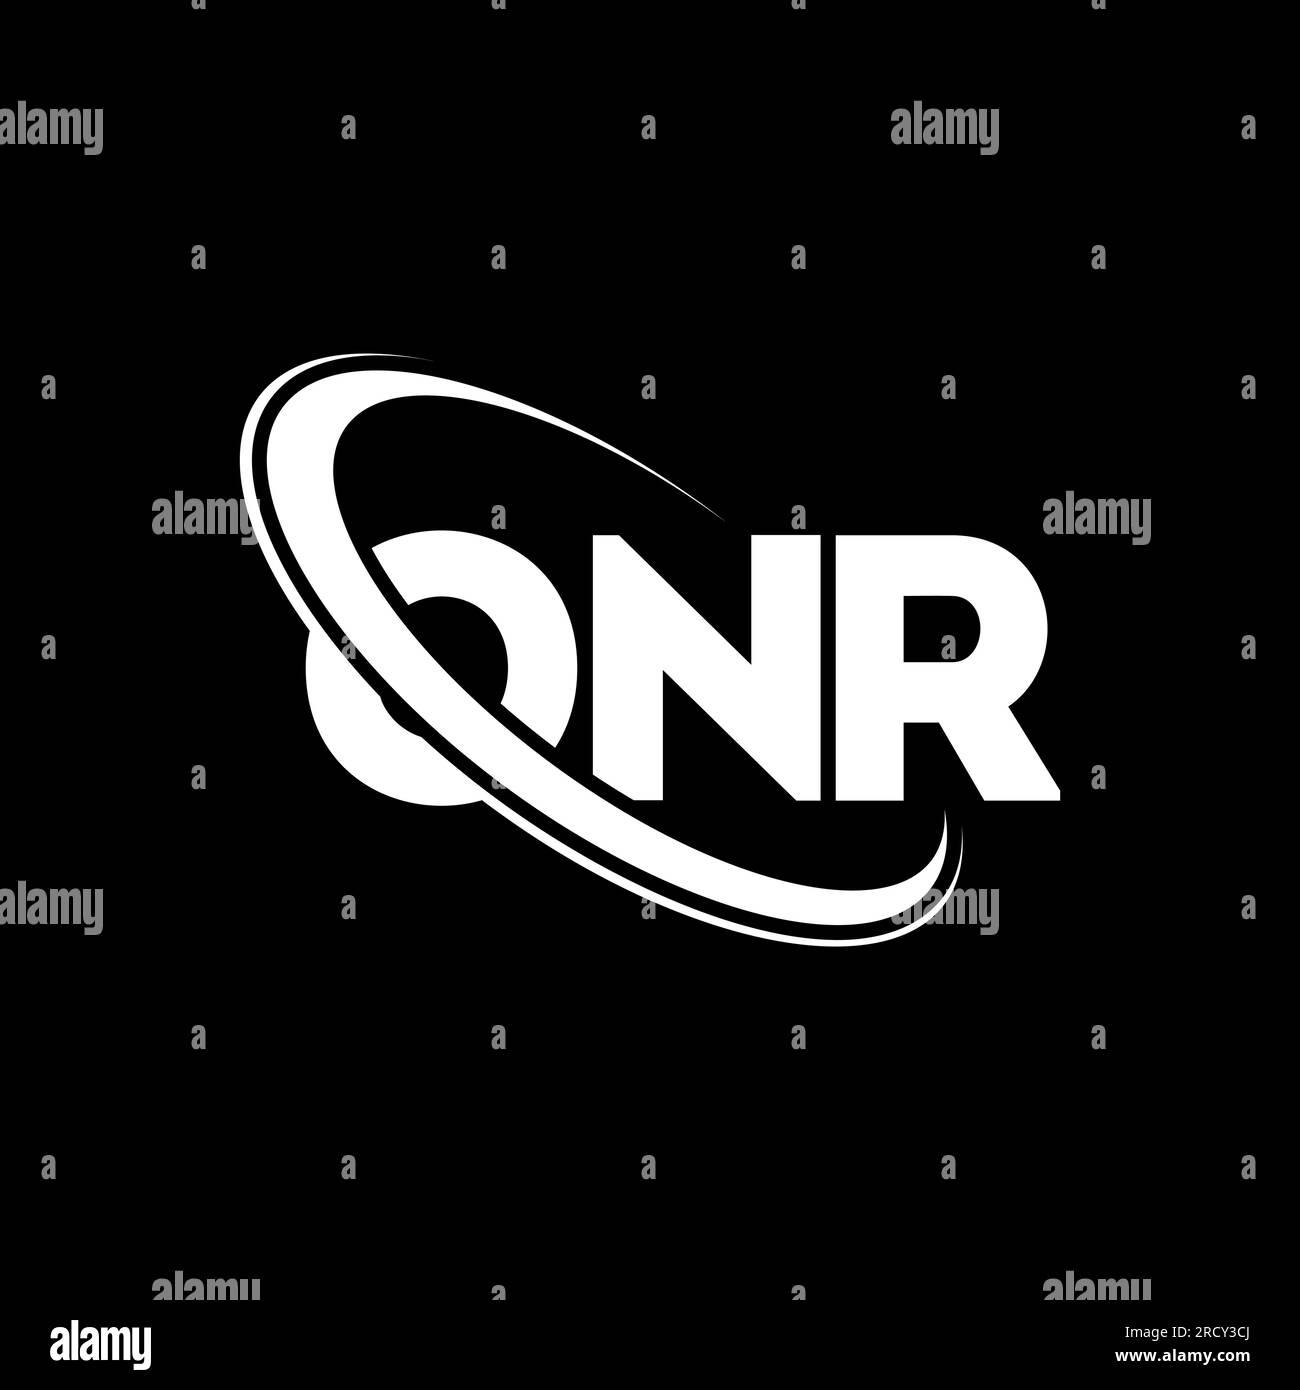 Onr Black and White Stock Photos & Images - Alamy